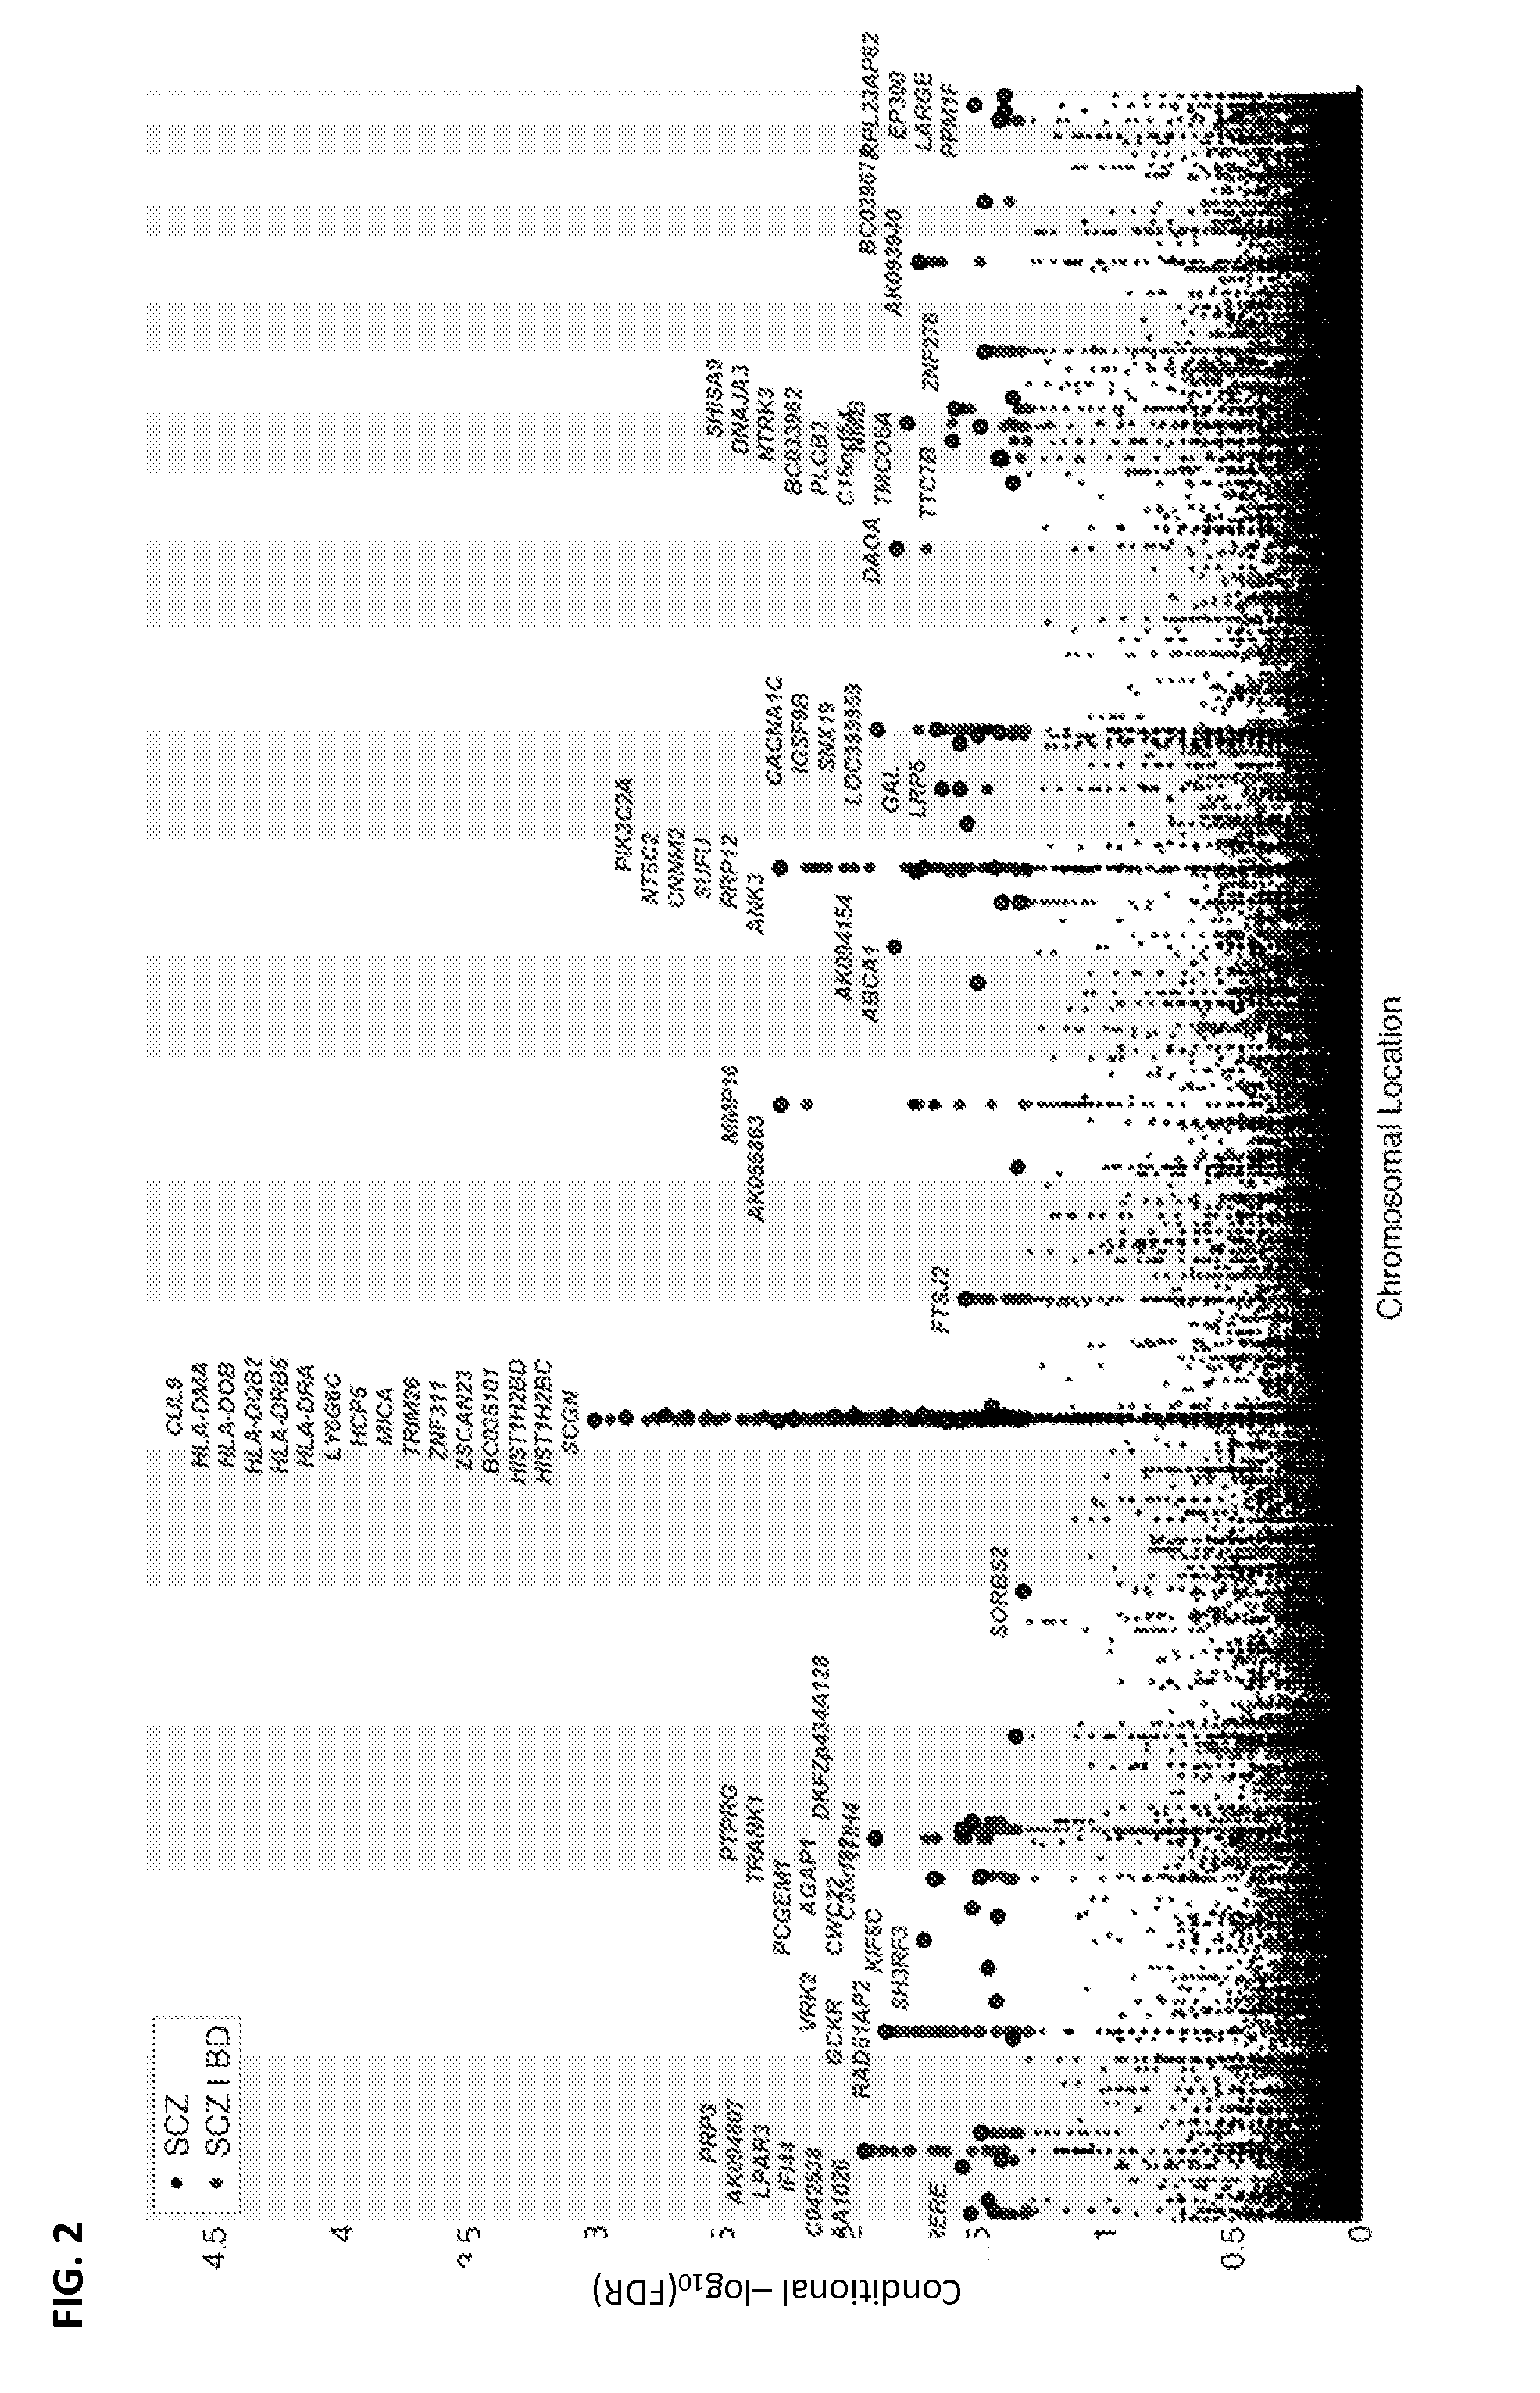 Systems and methods for identifying polymorphisms